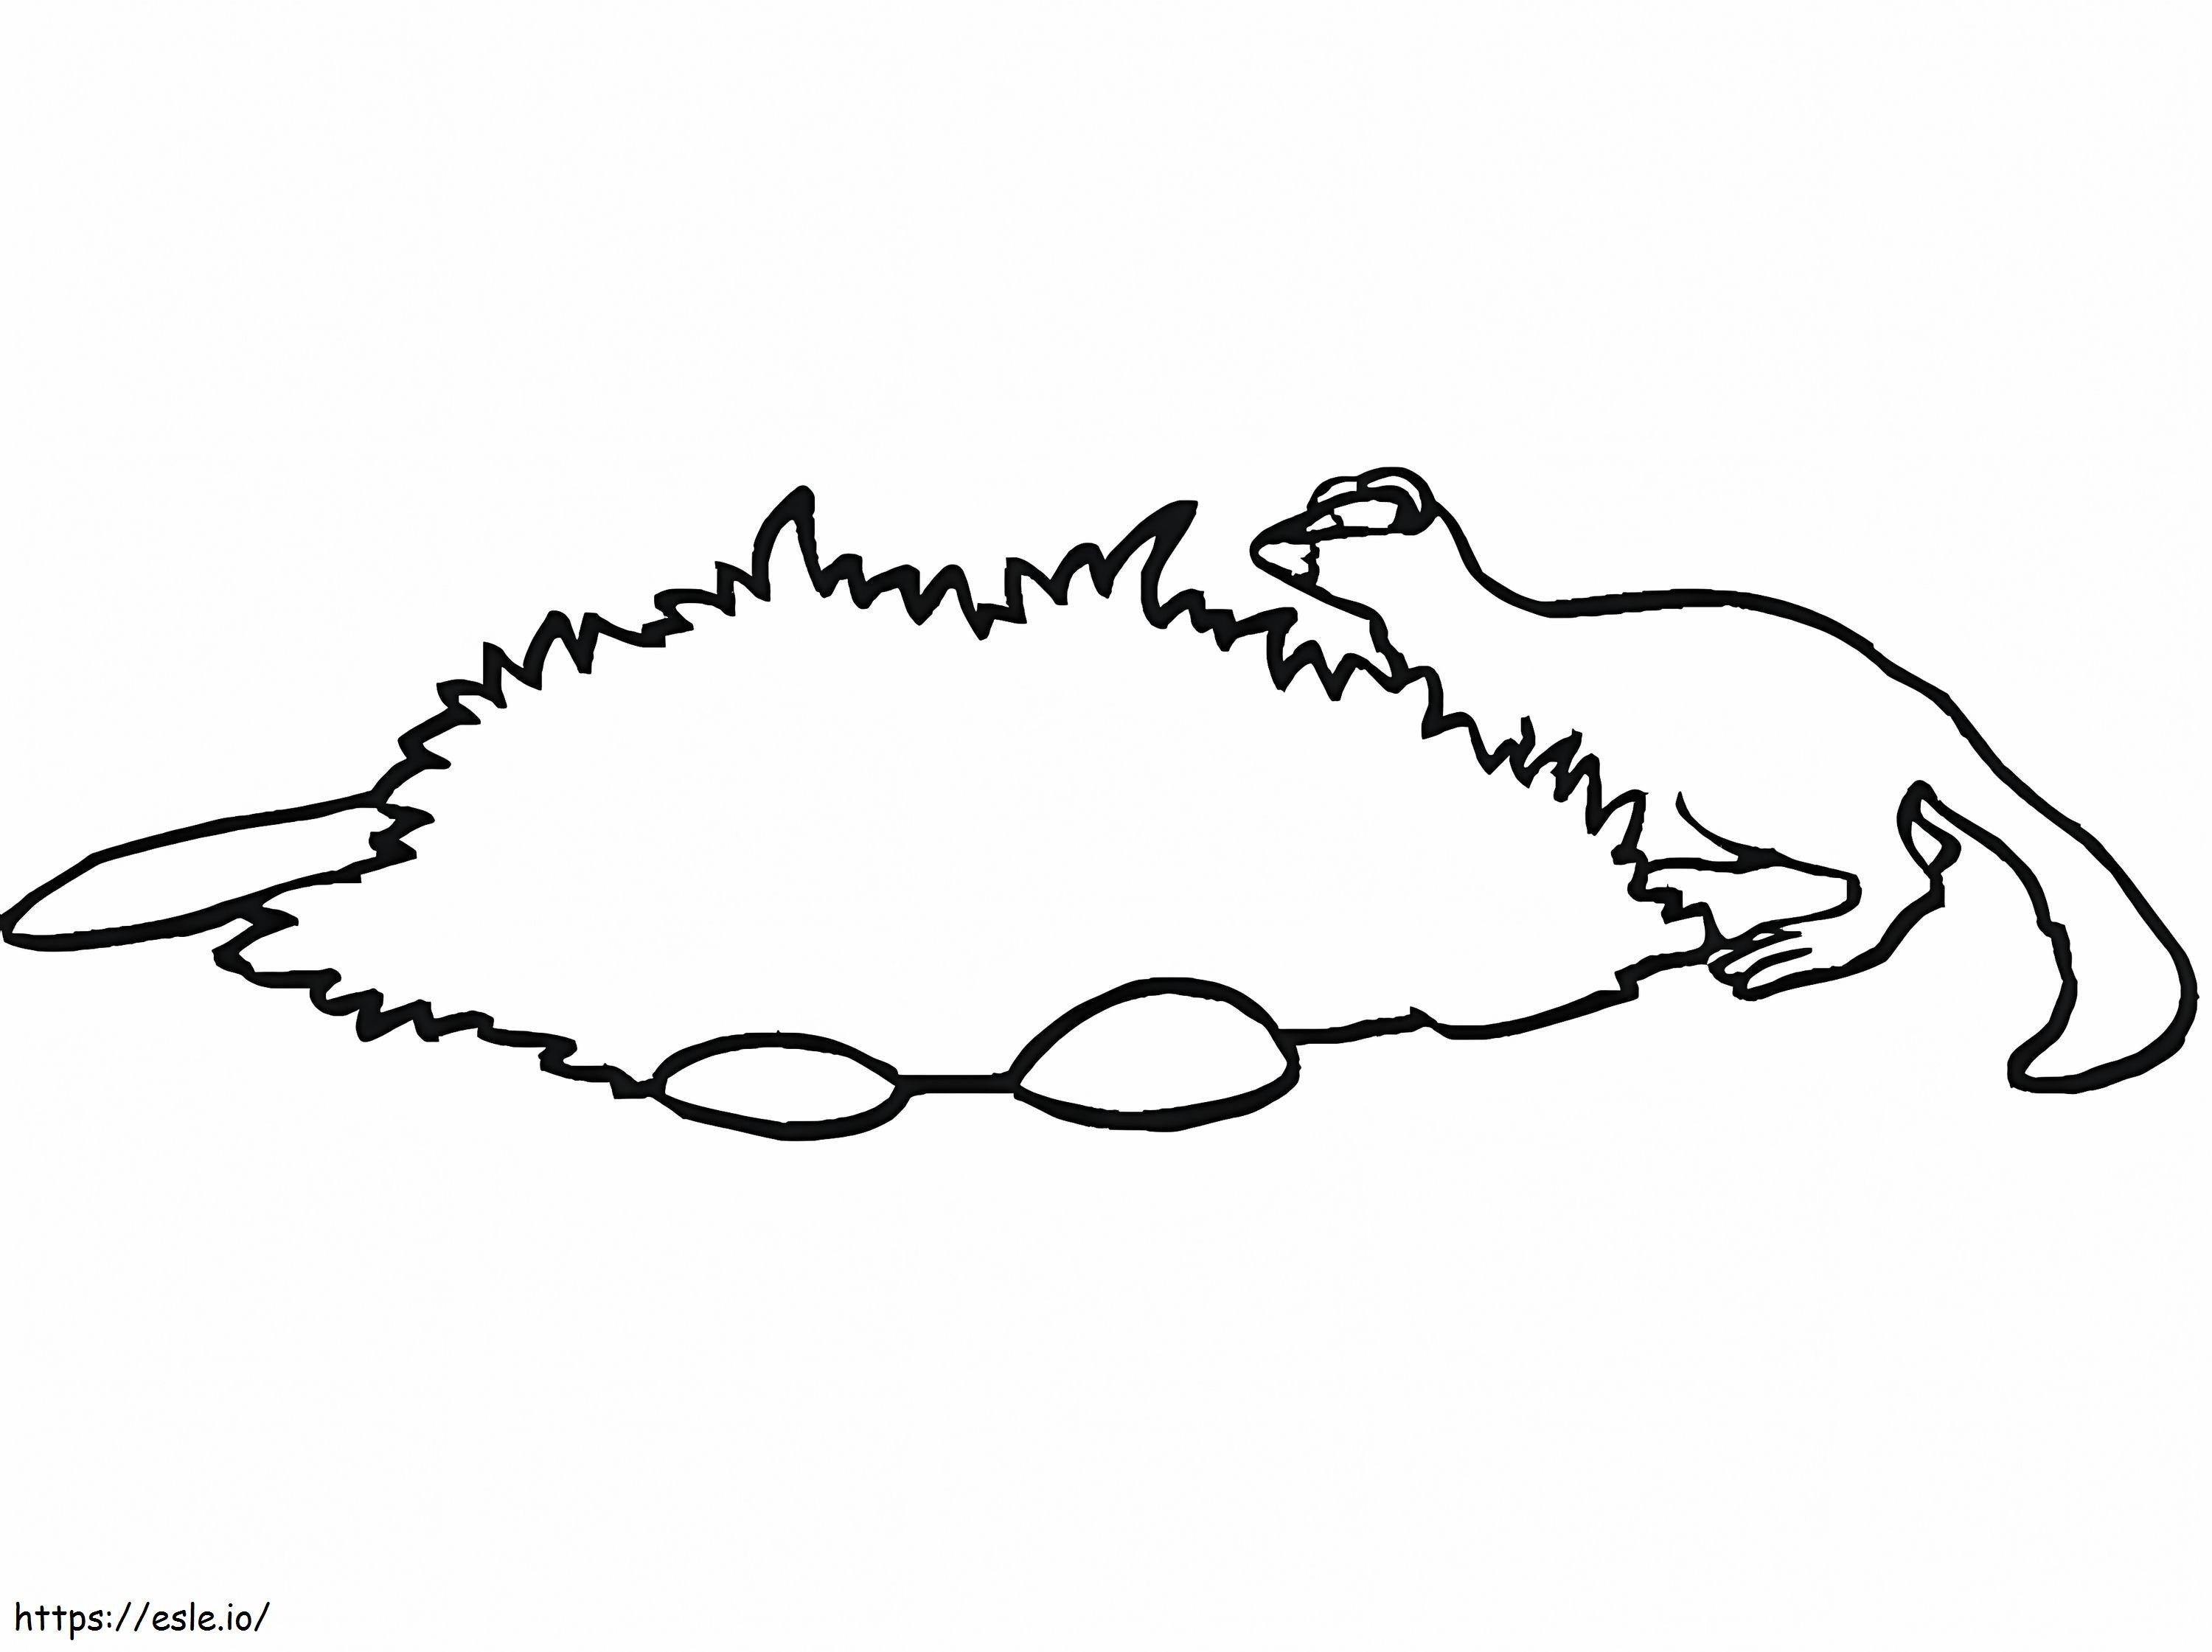 Printable Mink coloring page